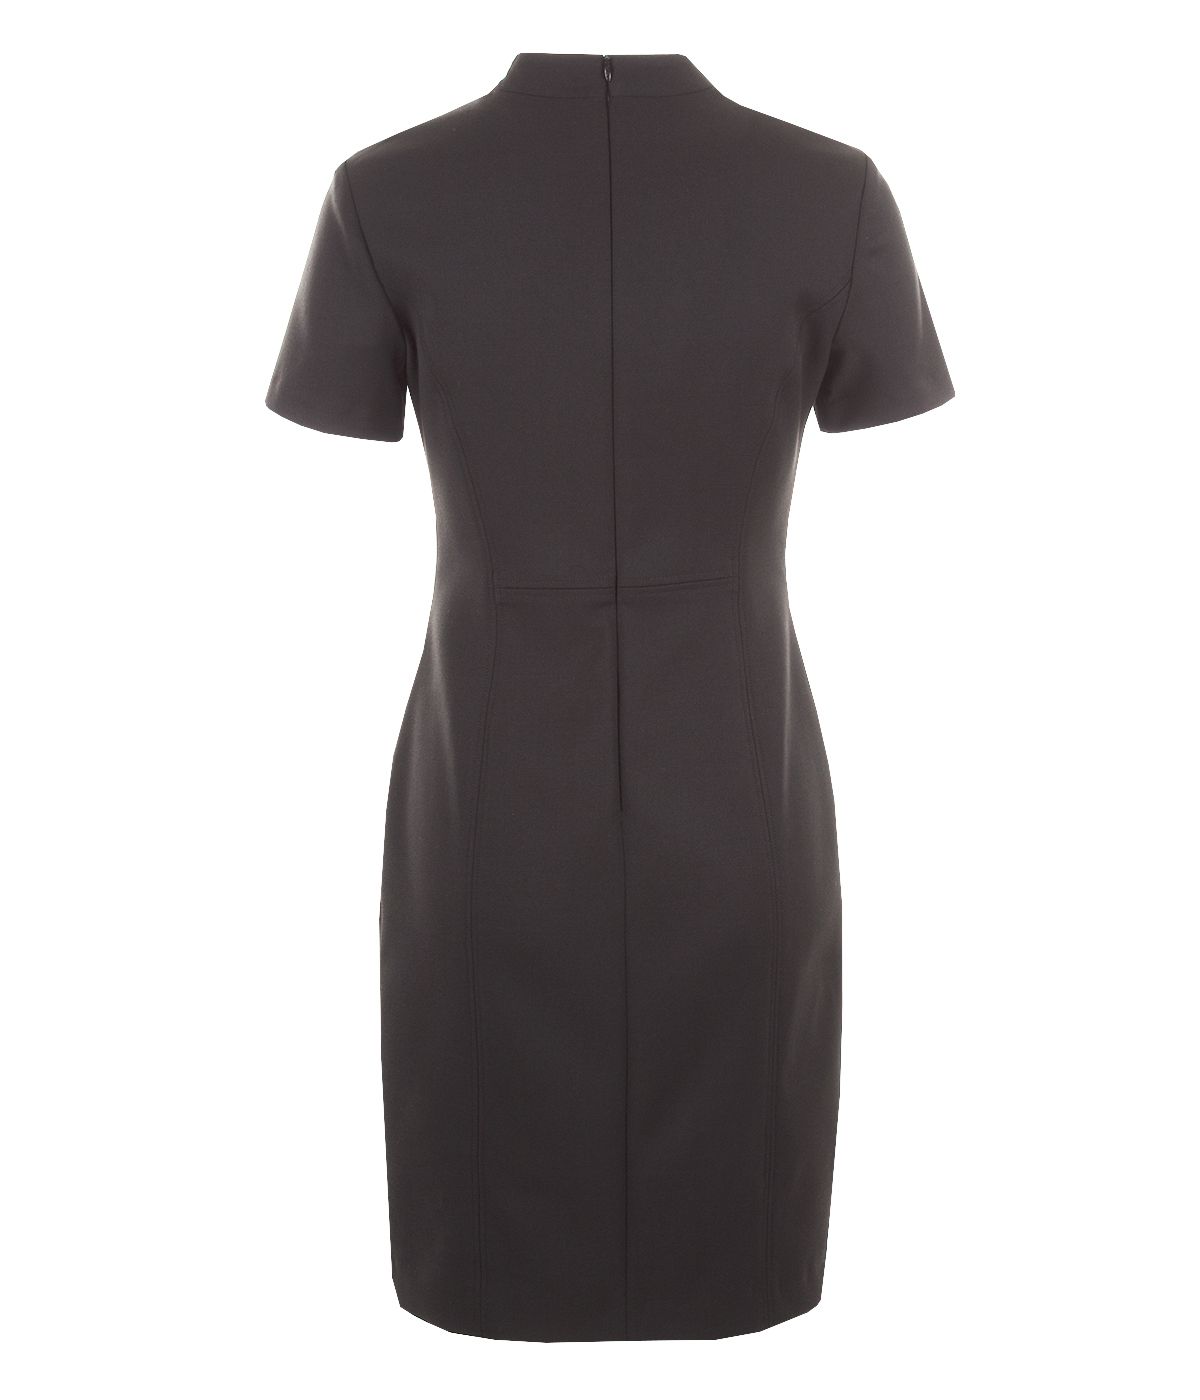 Semi-turtleneck dress with side buttons, short sleeves, rayon and viscose 1